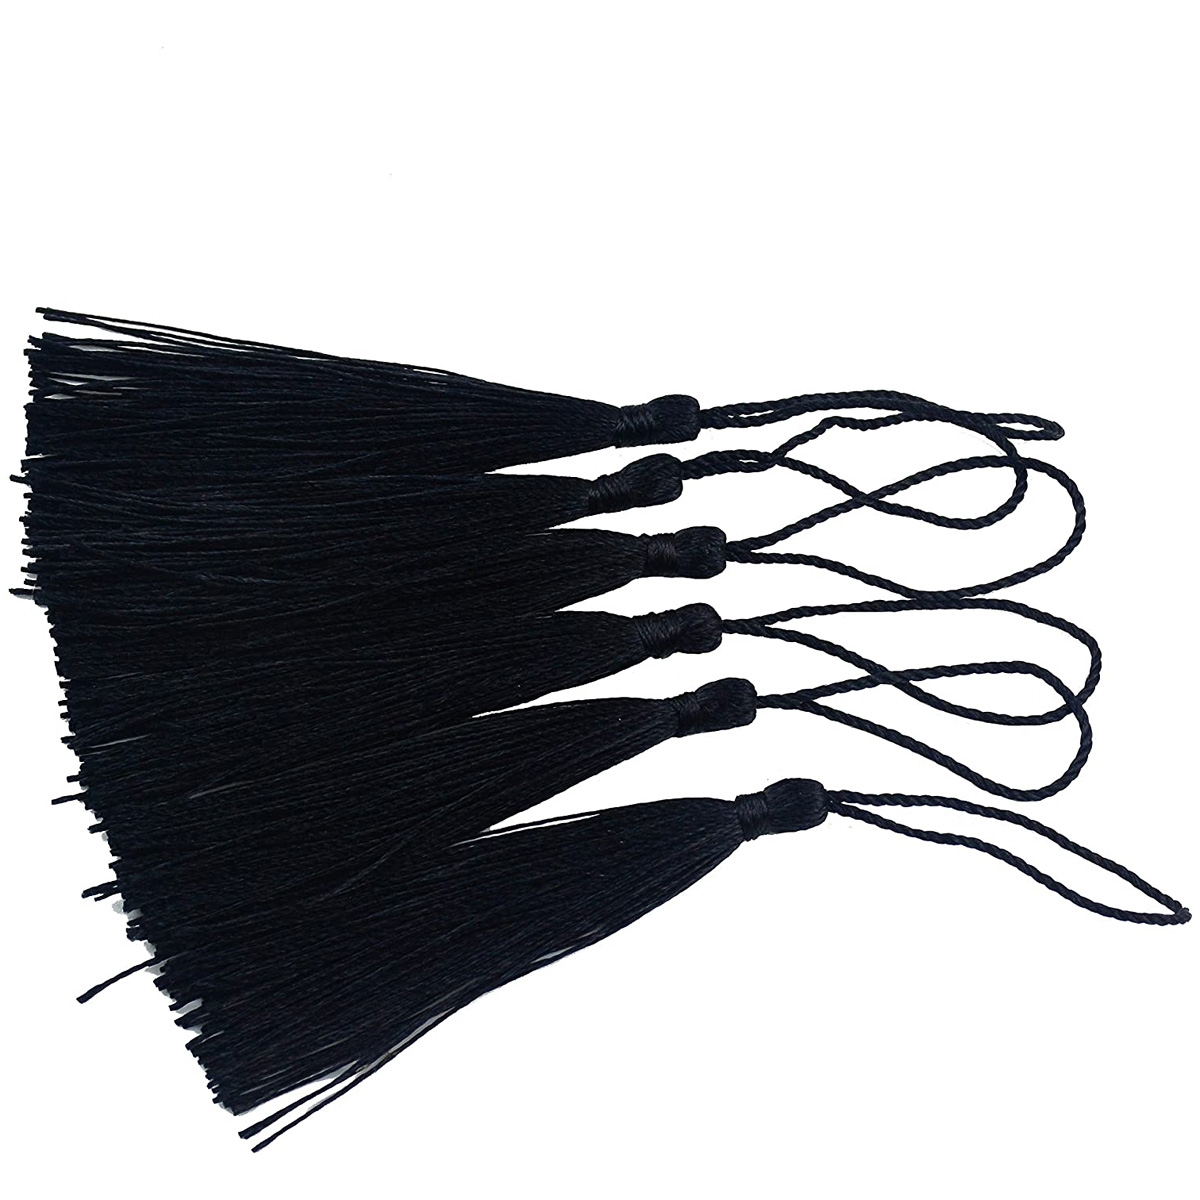 5 Inches Handmade Silky Floss Tassel,Bookmarks,Souvenir(Black) with Loops for DIY, Jewelry Making